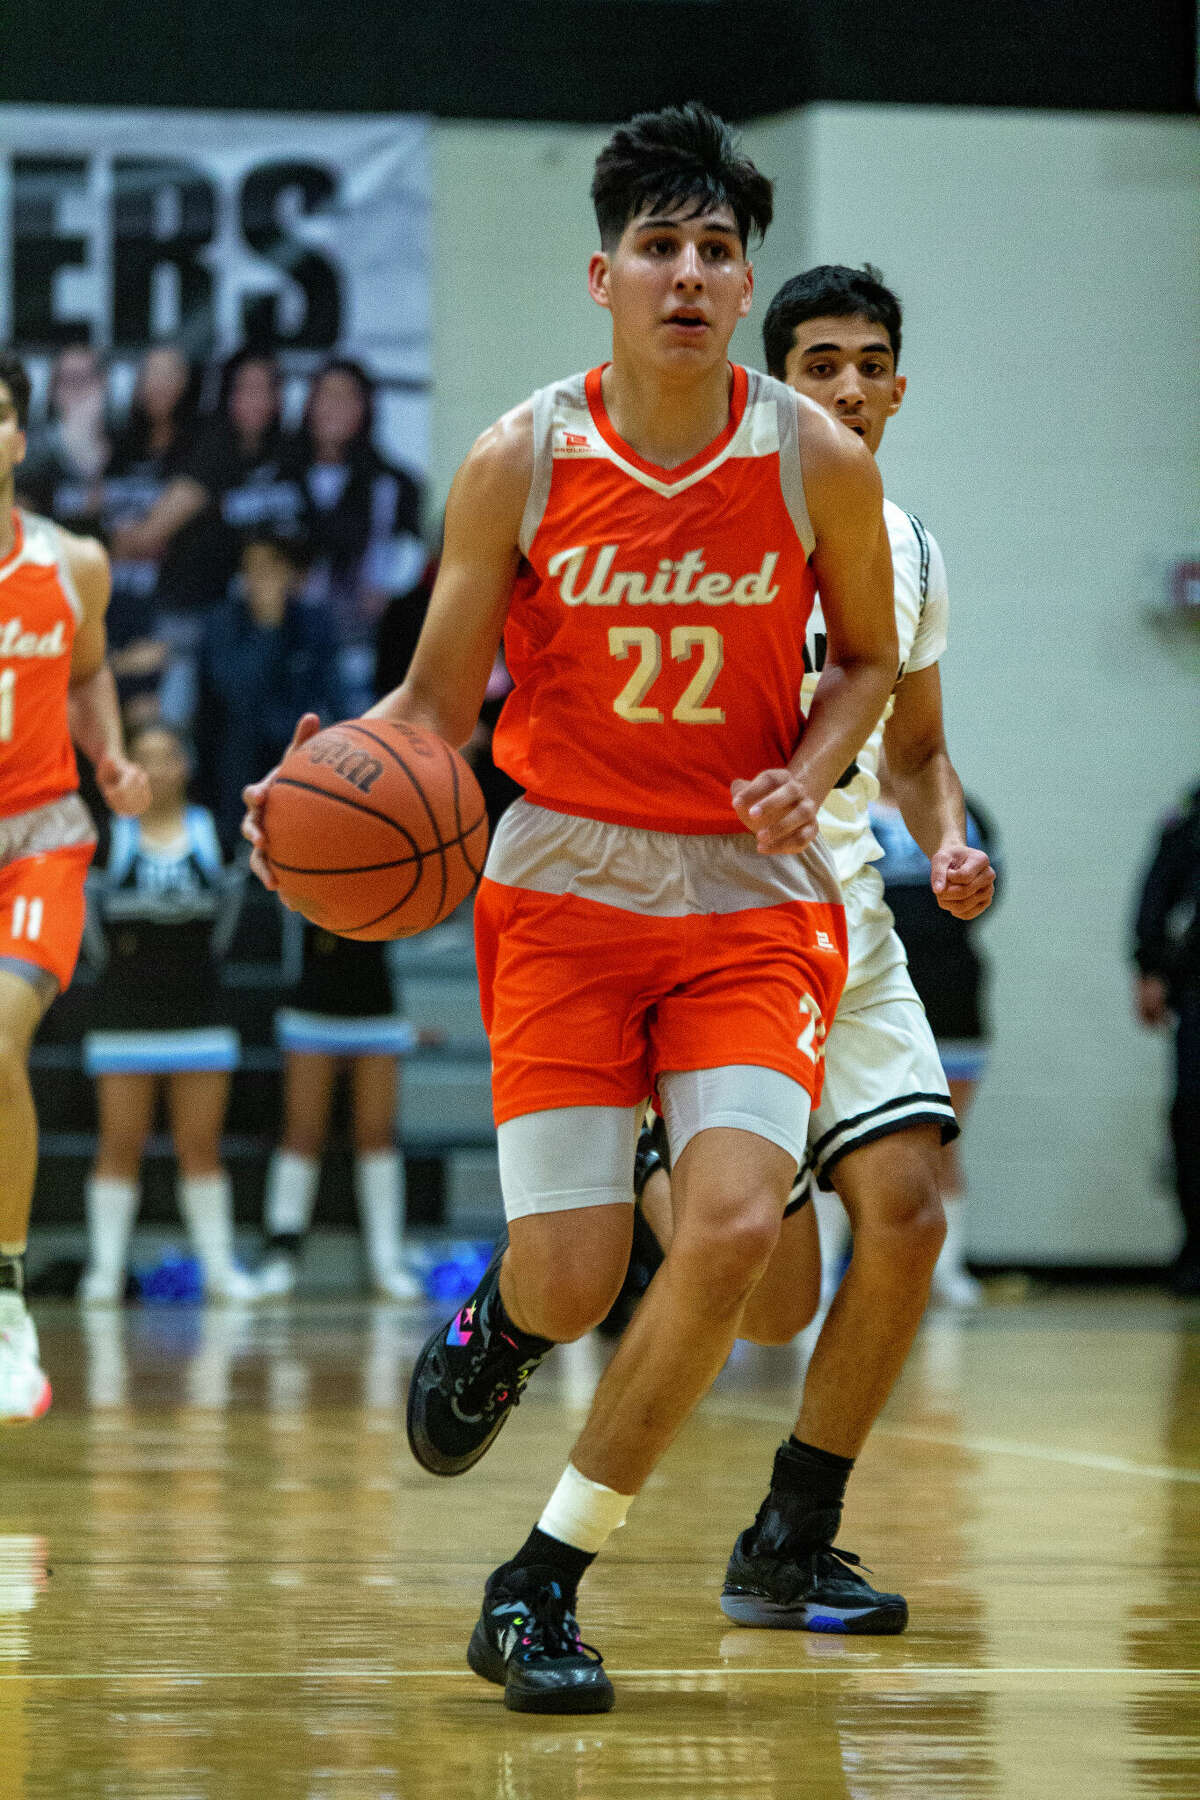 Ramon Chavez scored 22 points as United beat United South on Friday.